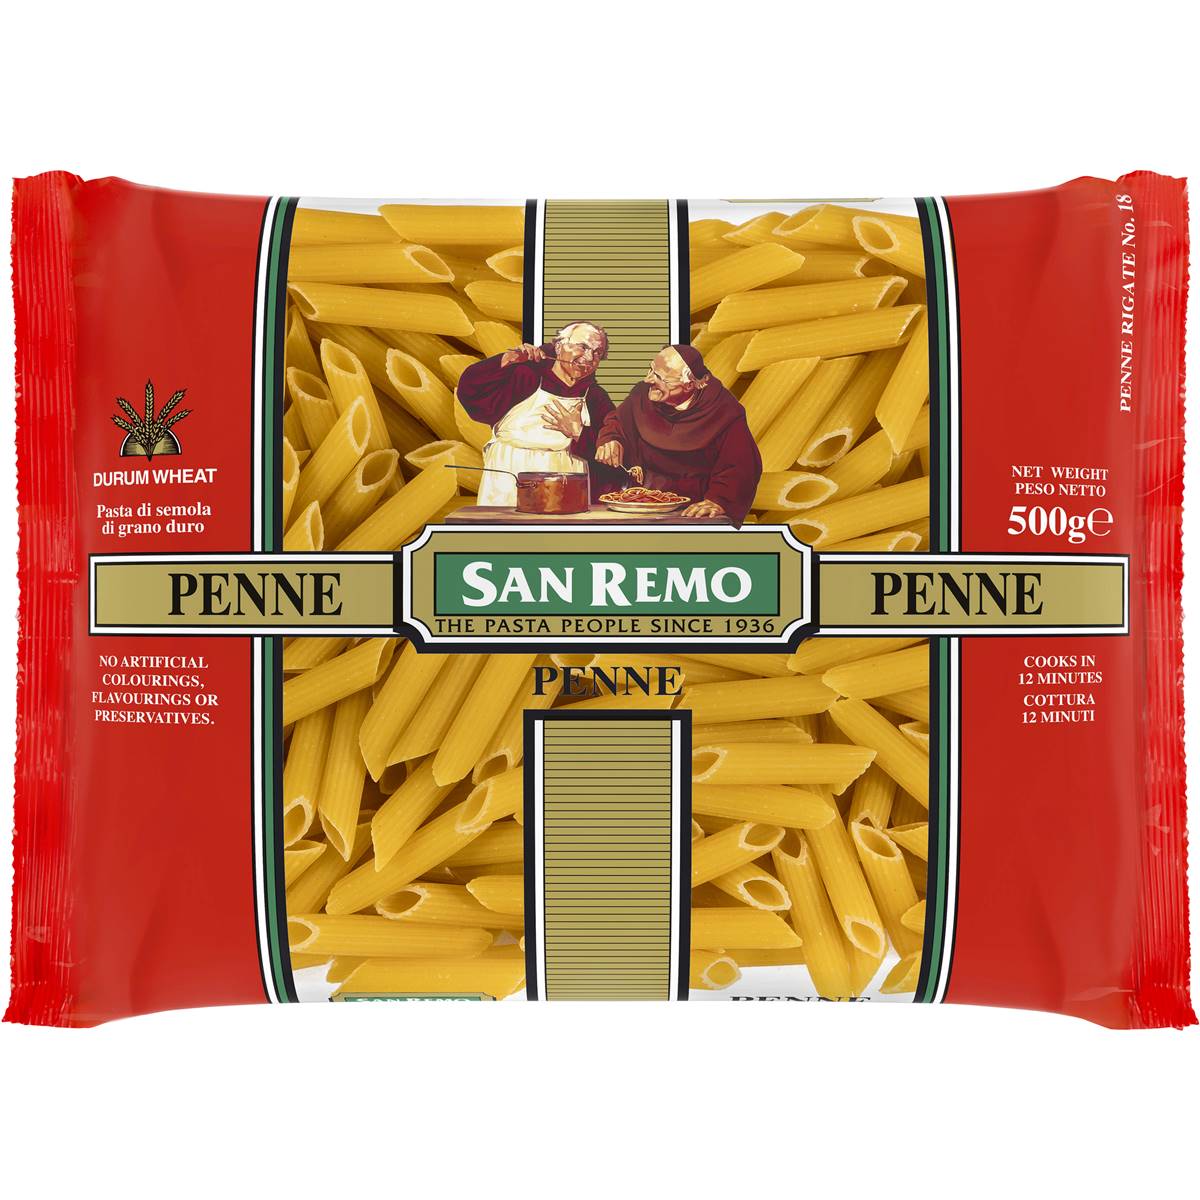 Calories in San Remo Penne Pasta No 18